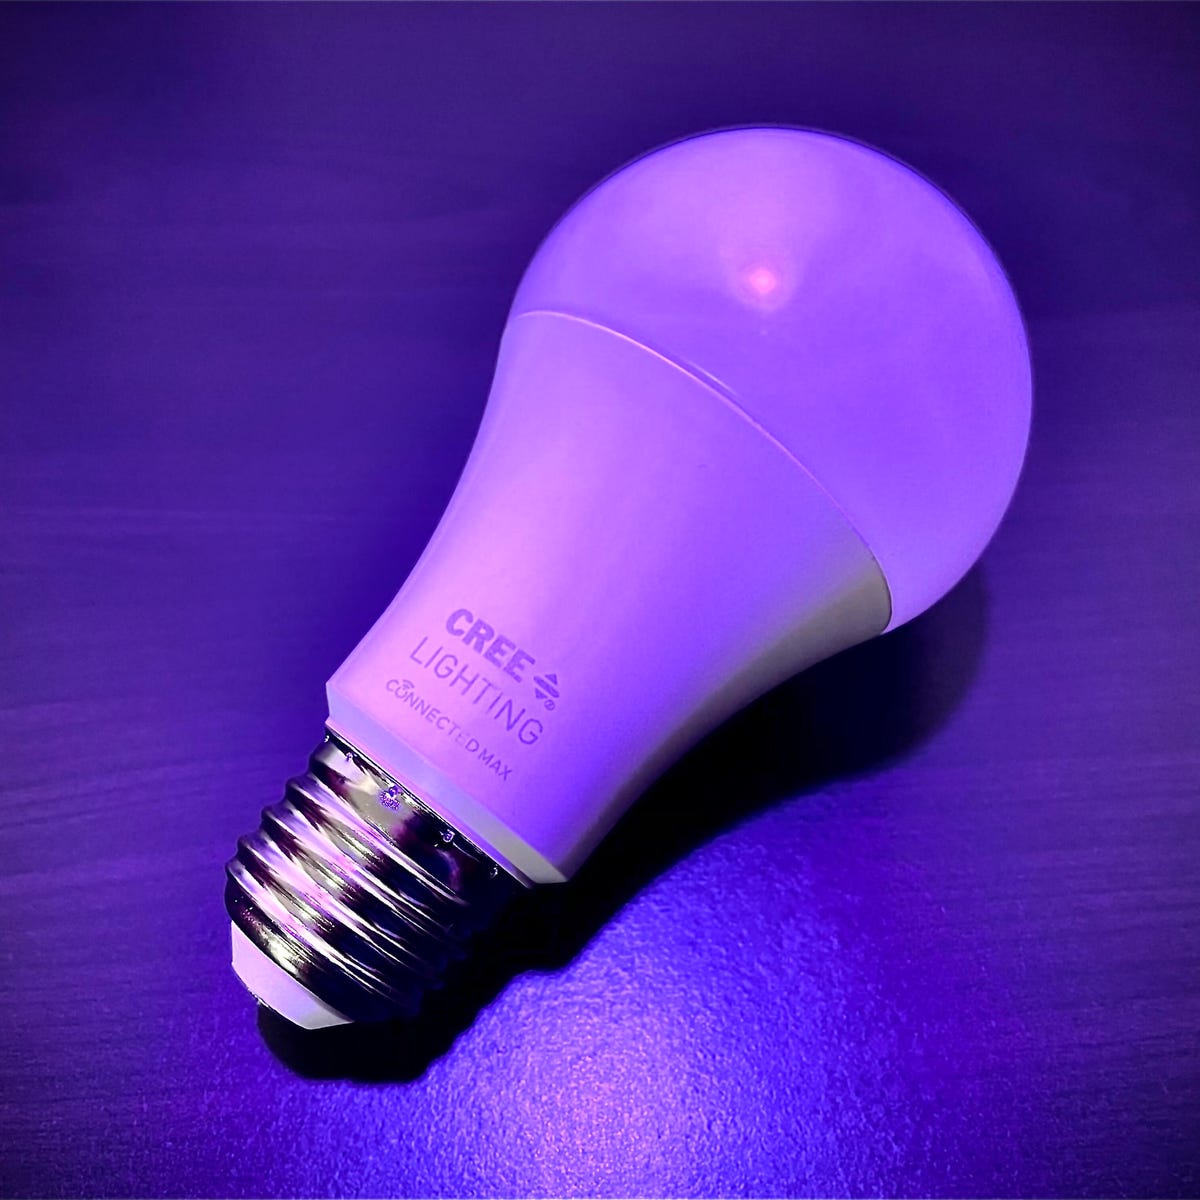 Cree Connected Max LED review: Smart, color-changing light for